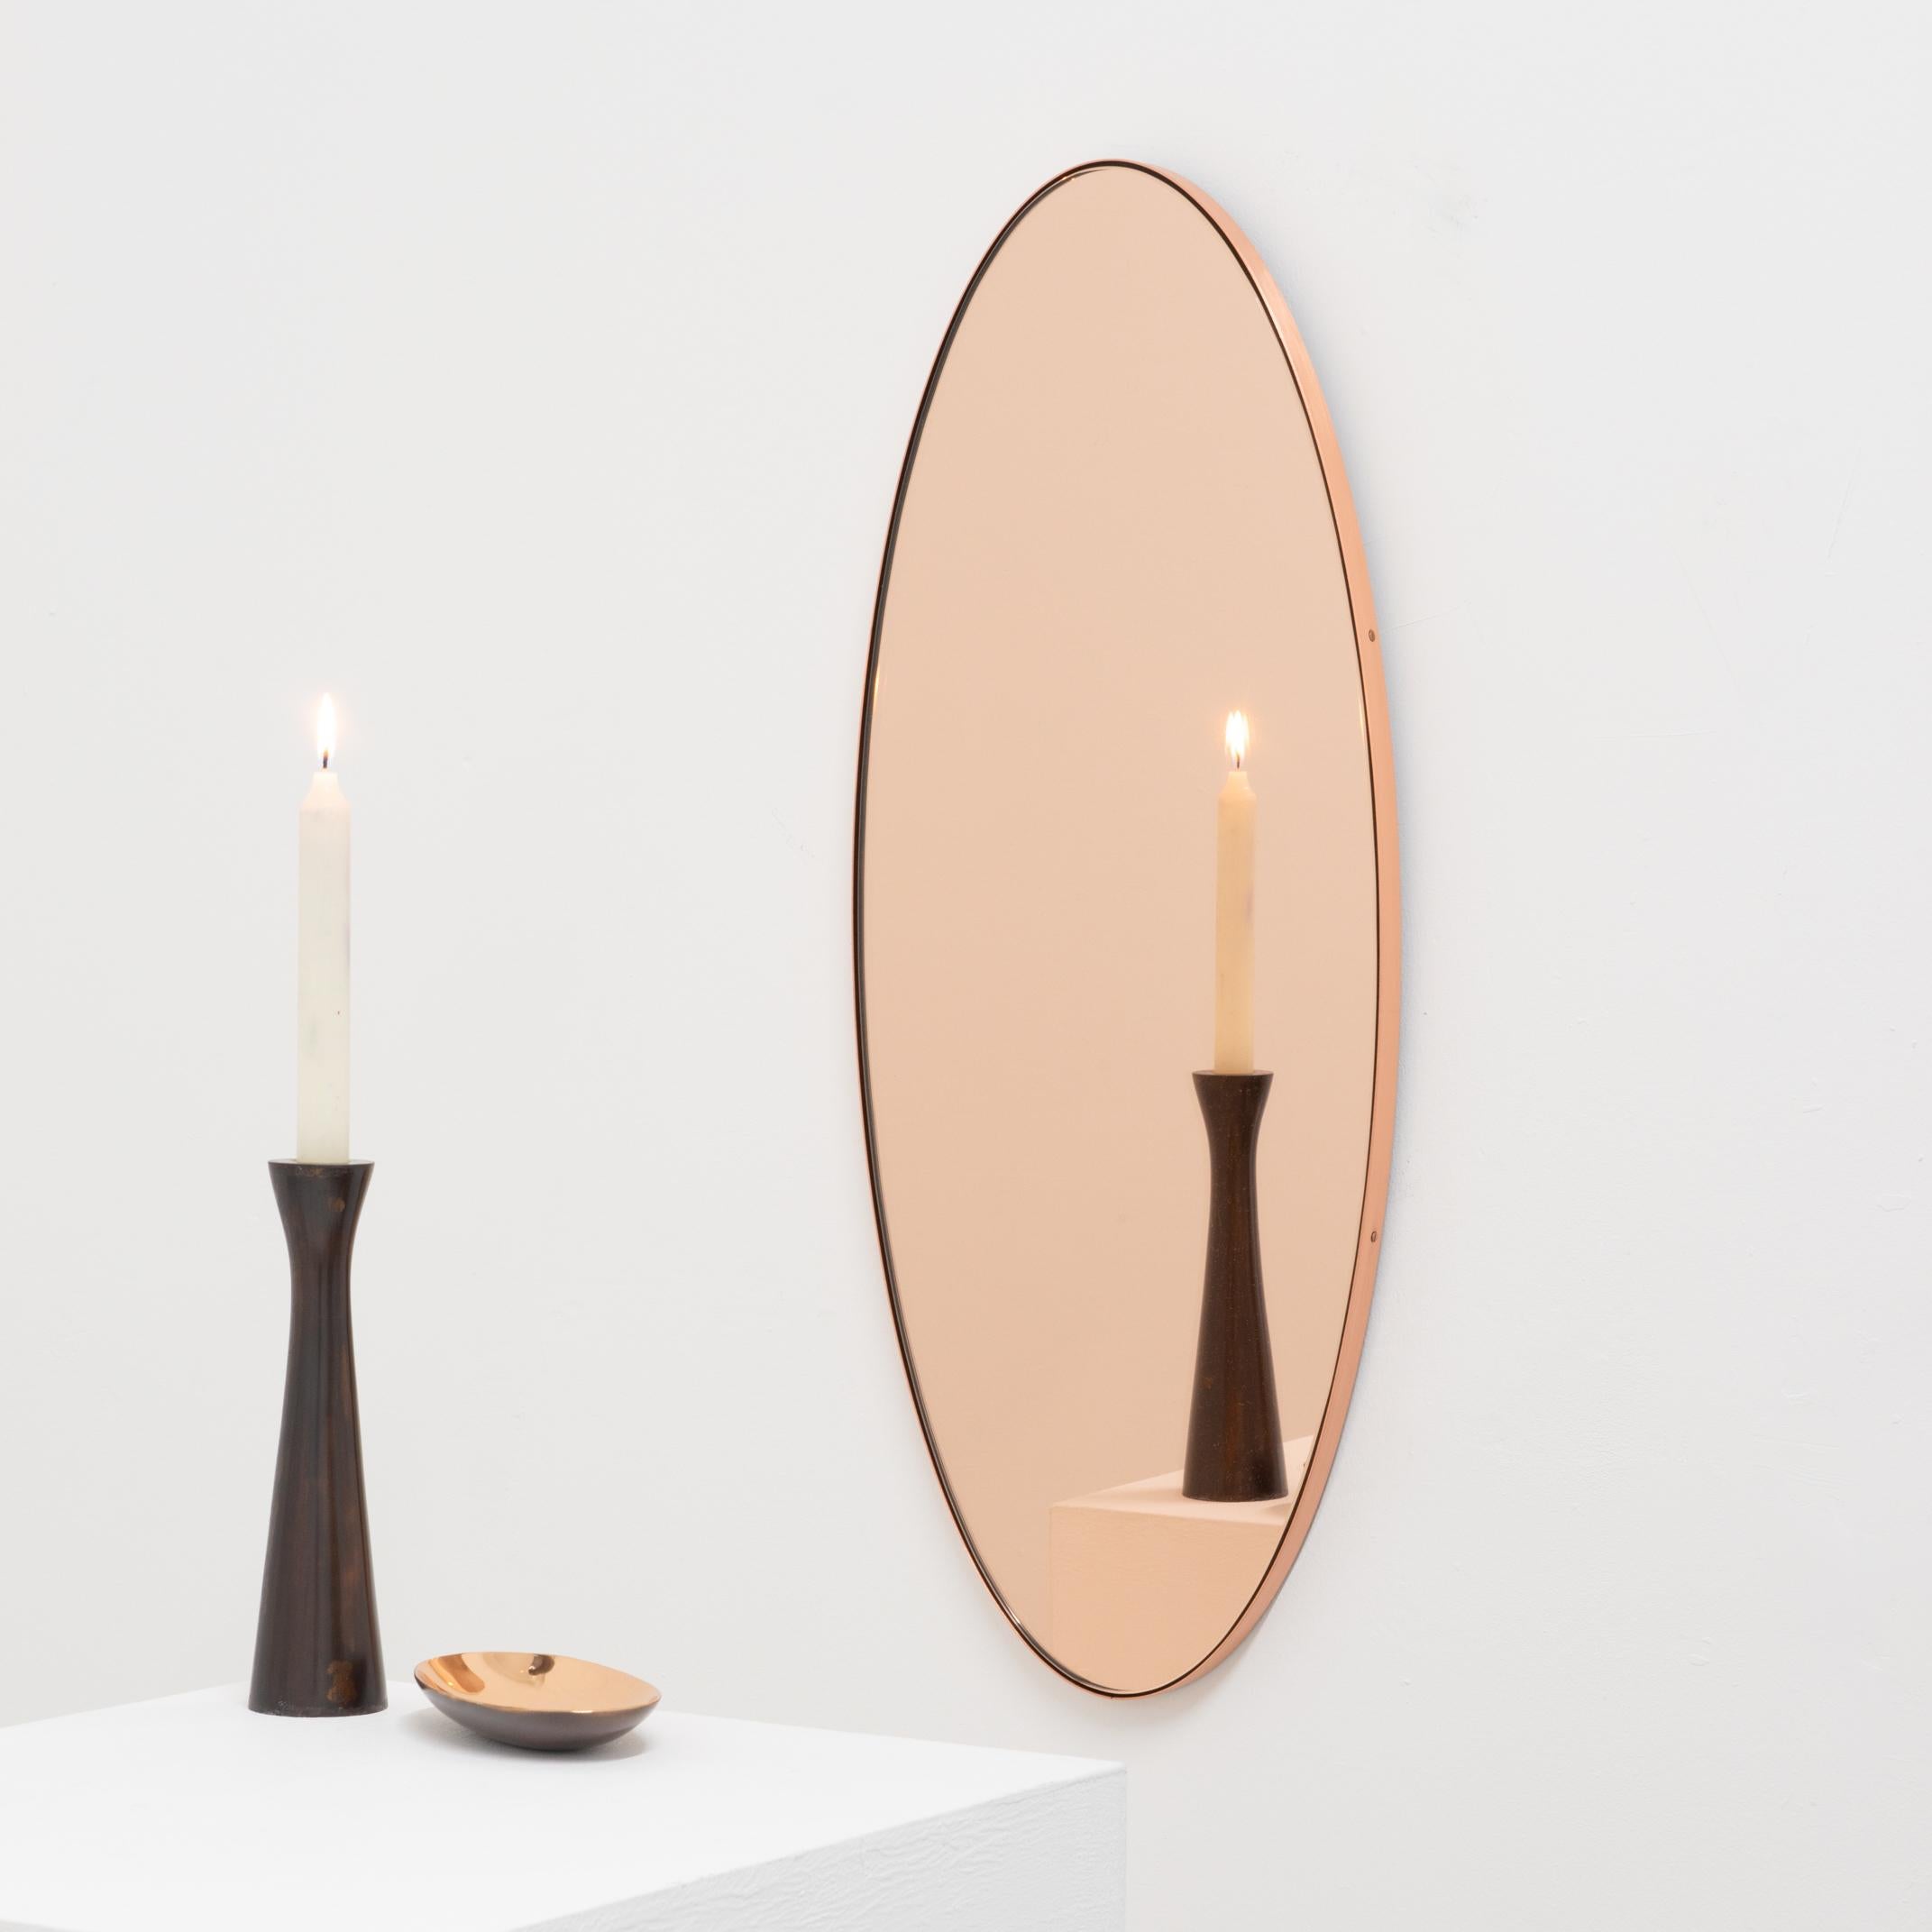 Ovalis Oval Peach Rose Gold Handcrafted Mirror with Copper Frame, Large In New Condition For Sale In London, GB